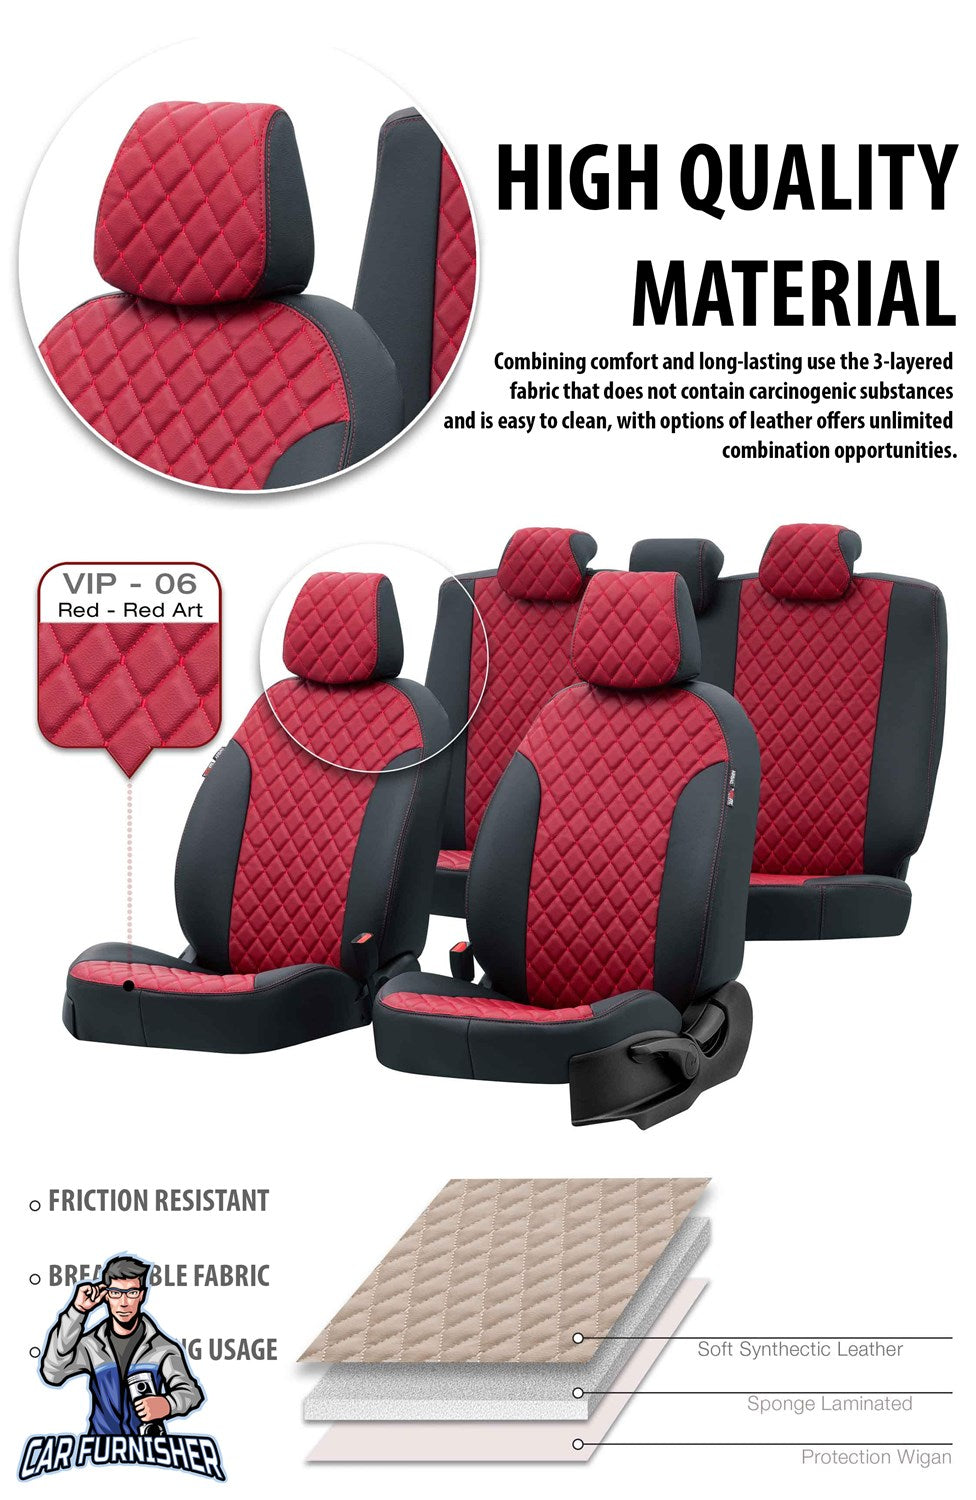 Seat Alhambra Seat Covers Madrid Leather Design Smoked Leather